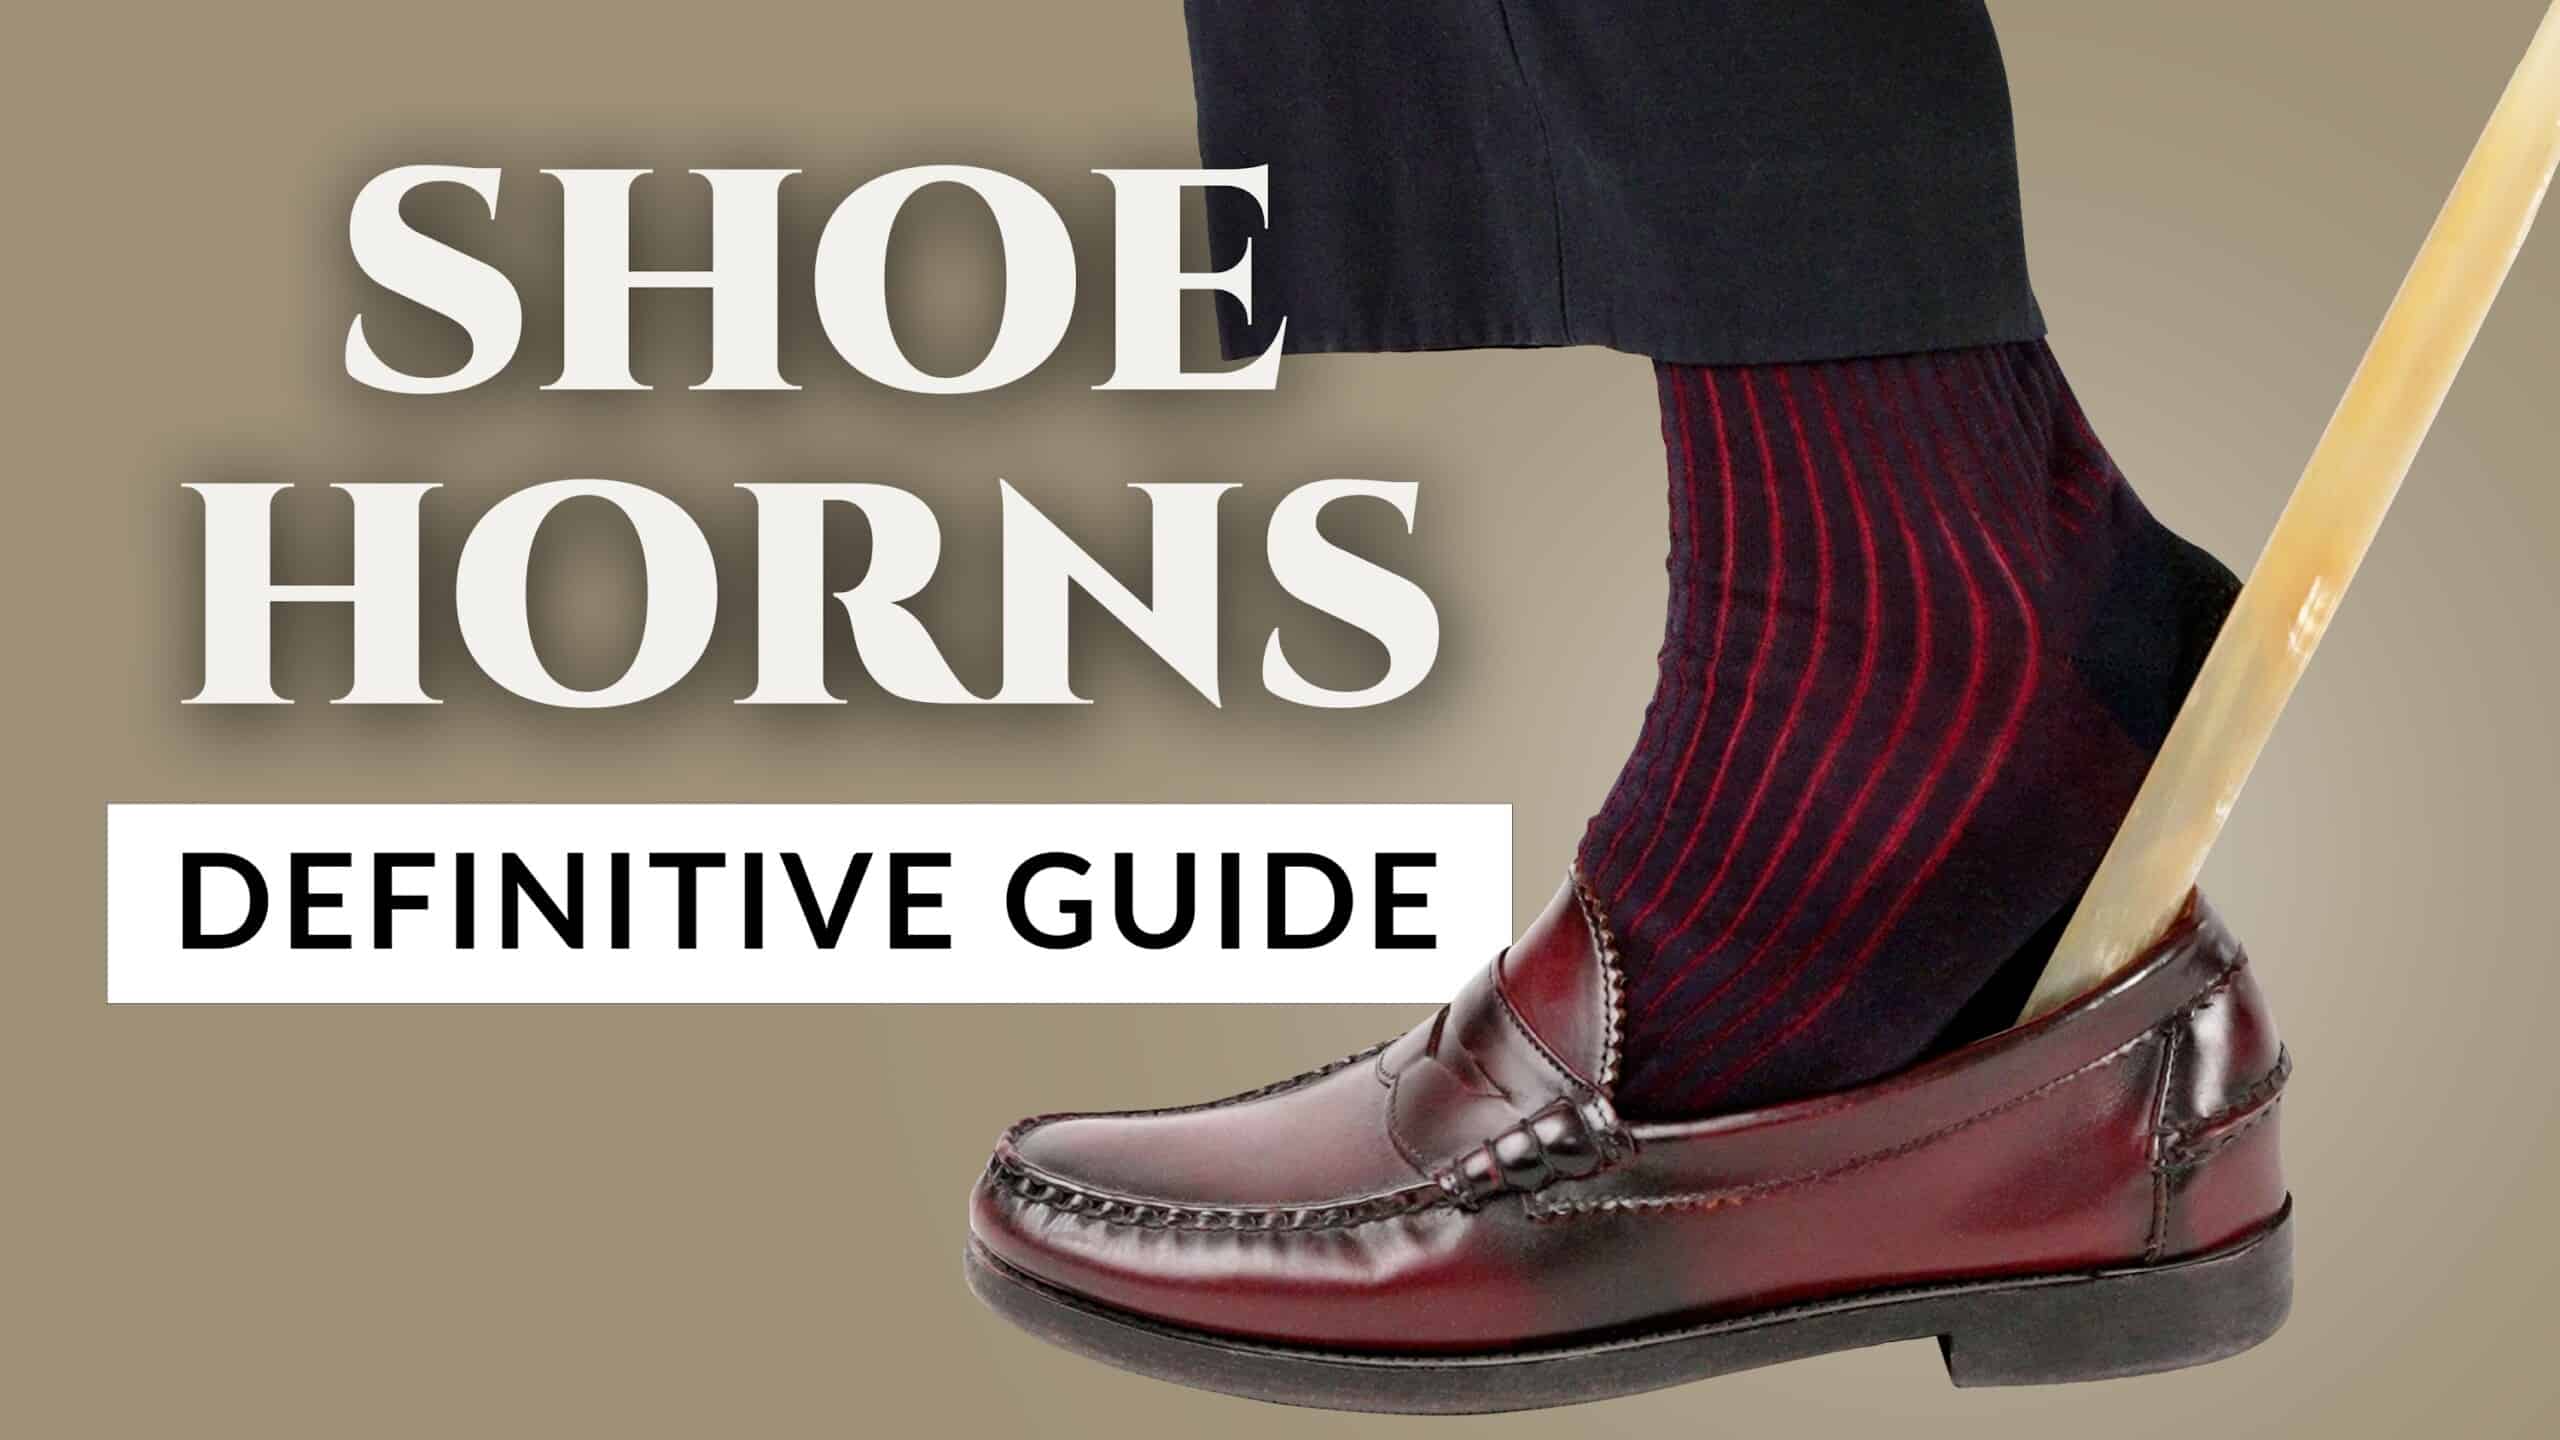 How to Effortlessly Slip into Your Shoes: Mastering the Art of Shoe Horn Usage